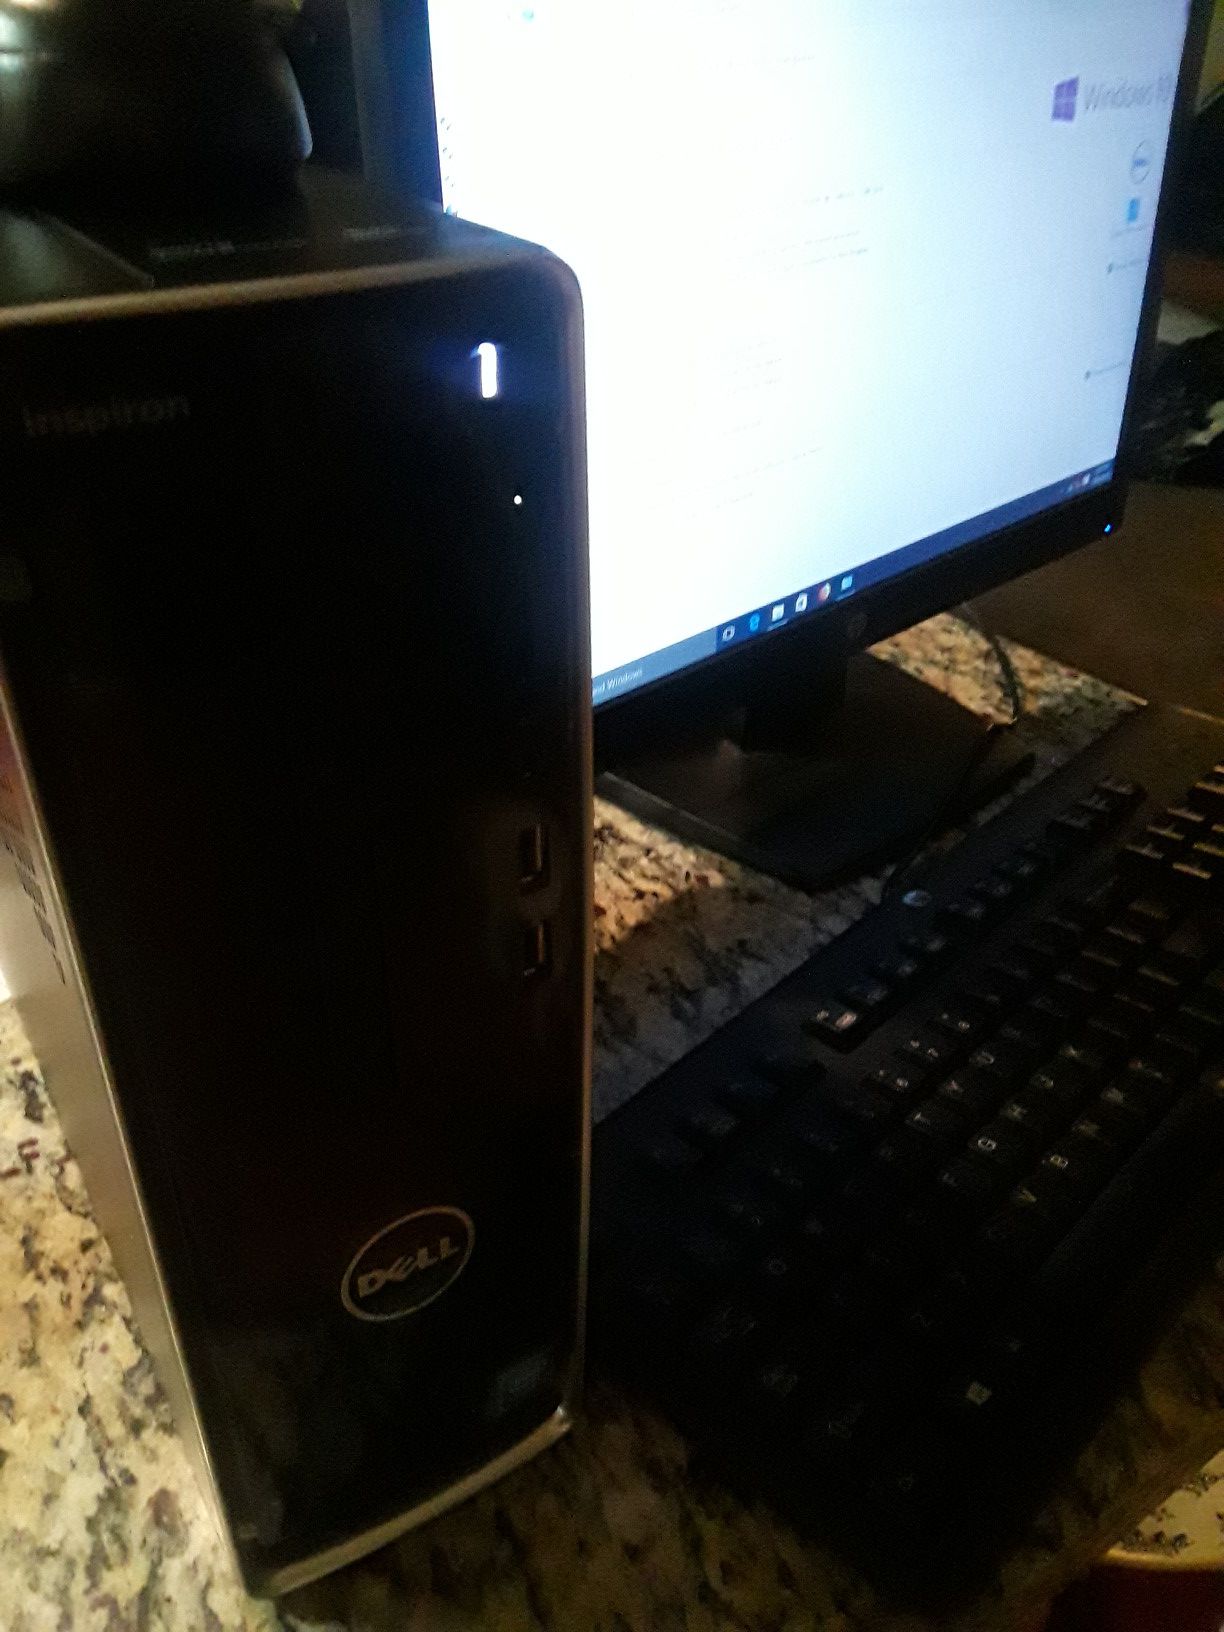 Dell Inspiron 3252 desktop with new monitor